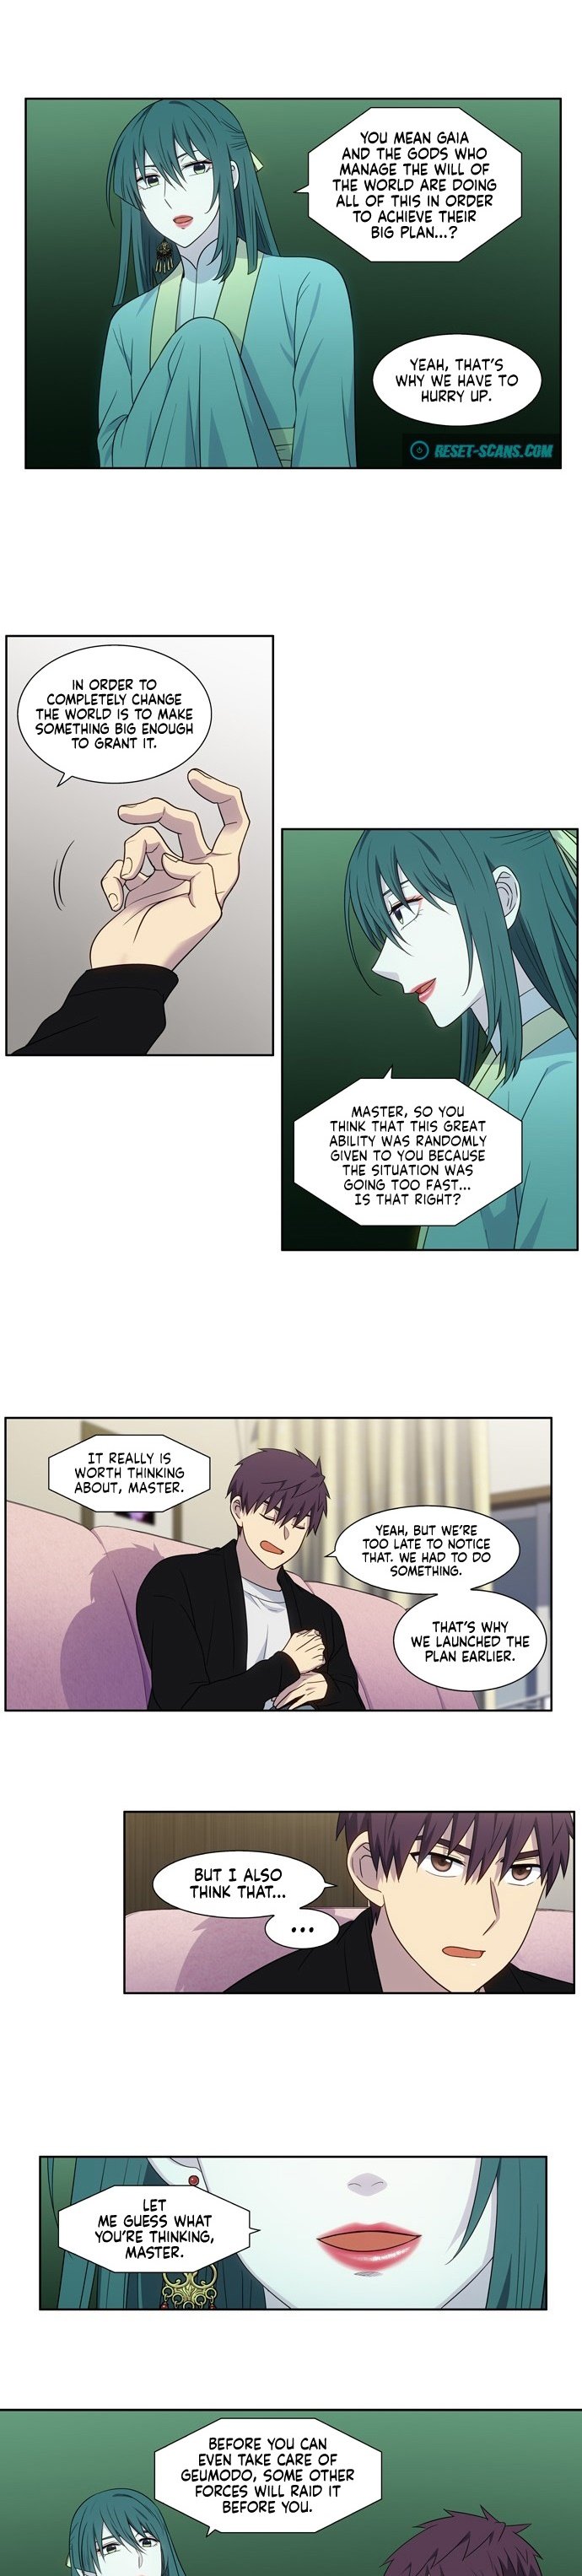 the-gamer-chap-393-5